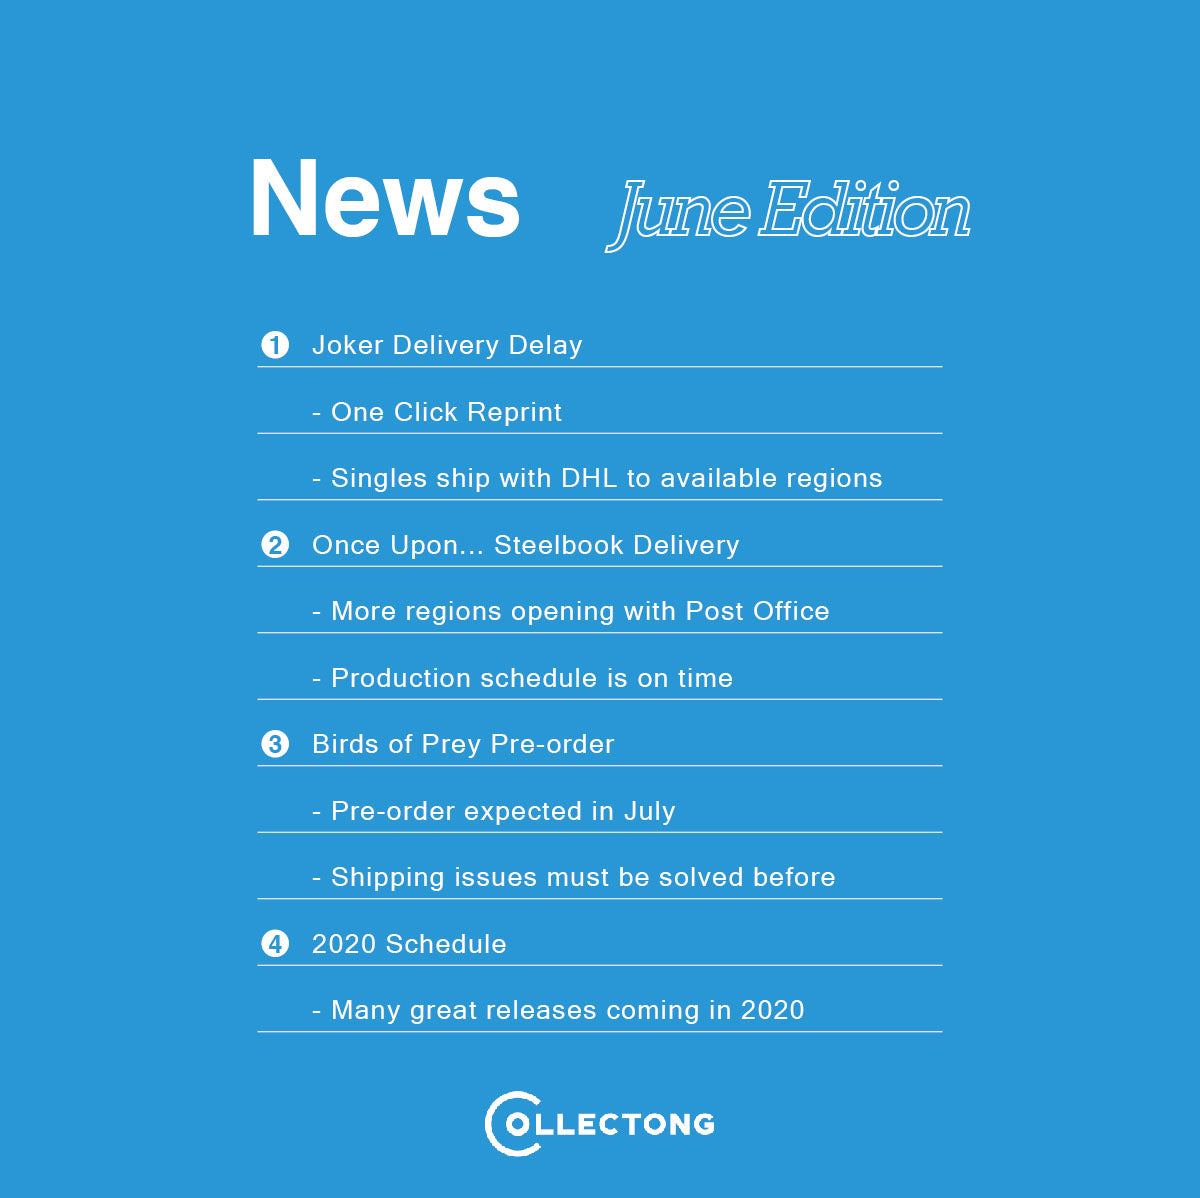 June News from Collectong